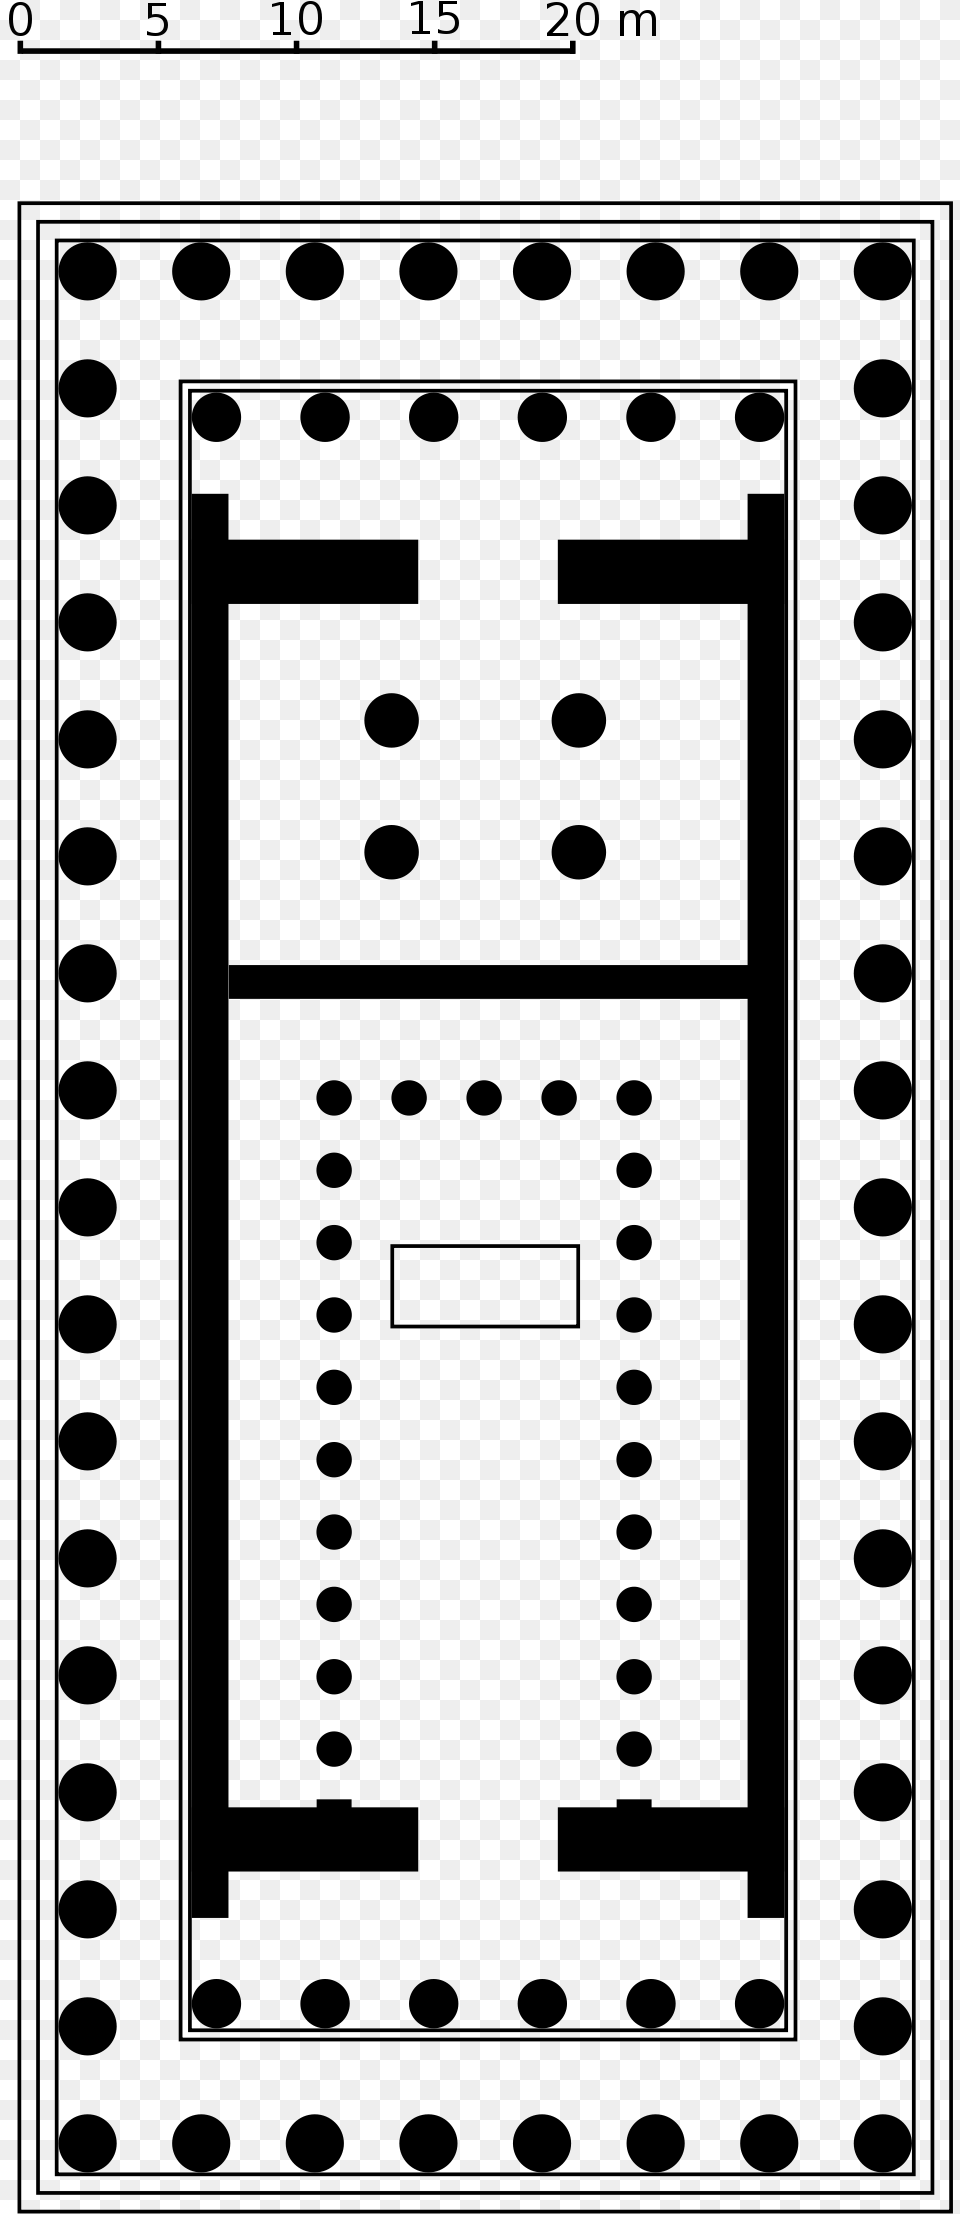 Plan Of The Parthenon, Gray Free Transparent Png